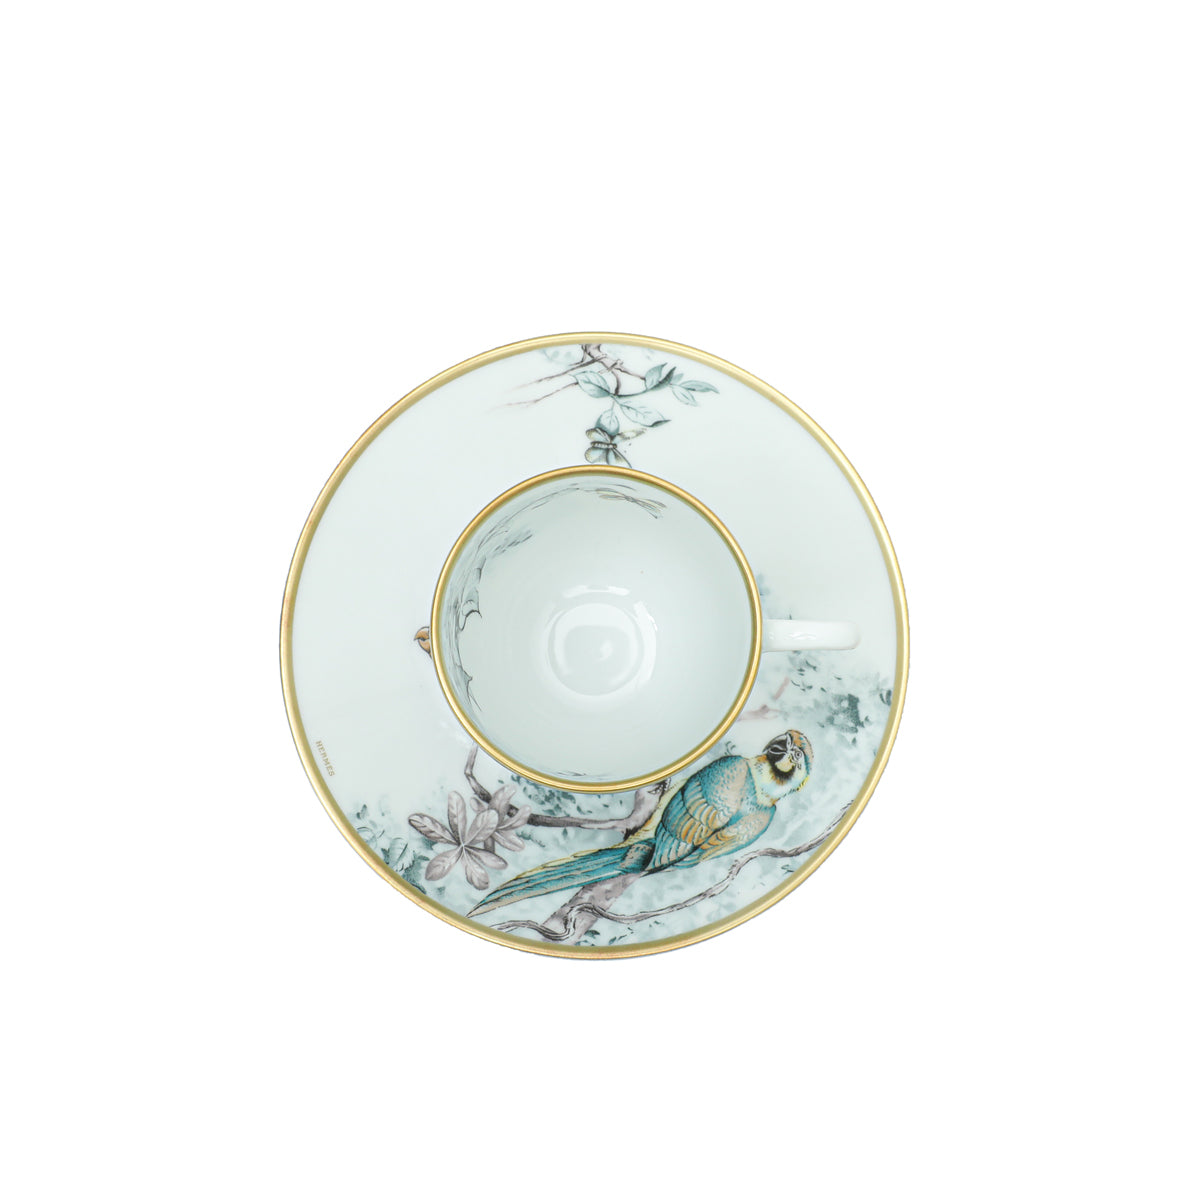 Hermes Carnets d'Equateur Porcelain Coffee Cup and Saucer